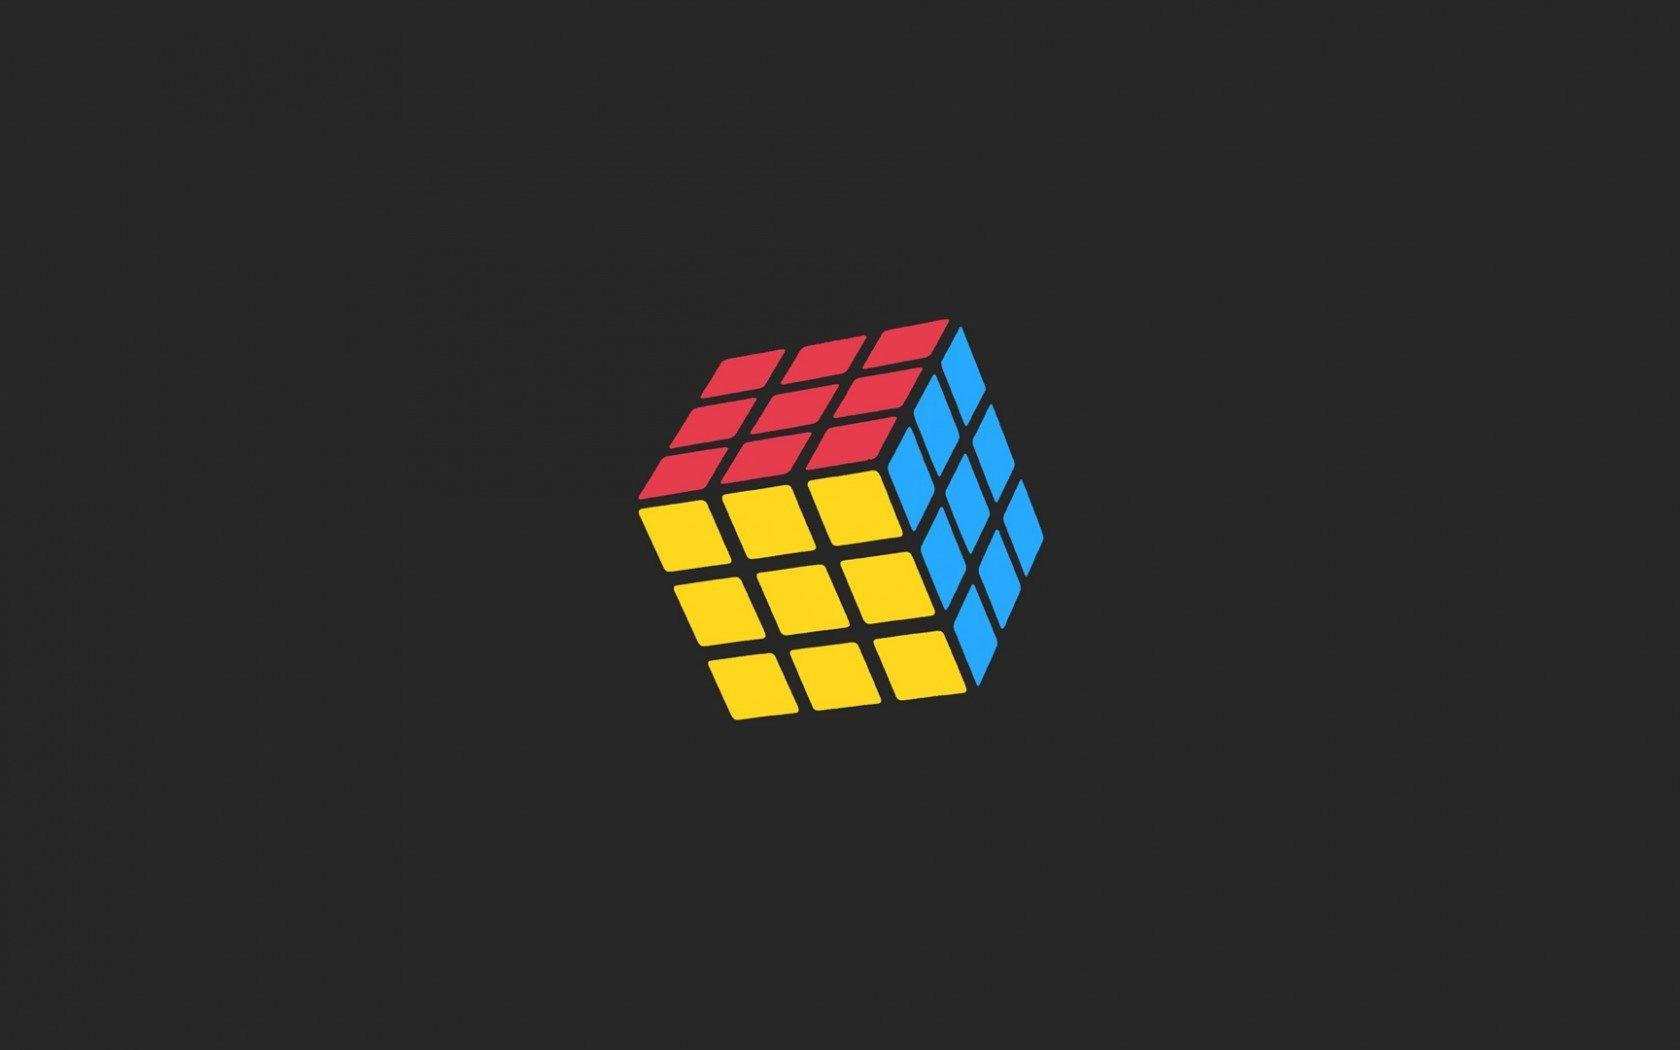 Your Favourite Cubing Related Wallpaper?